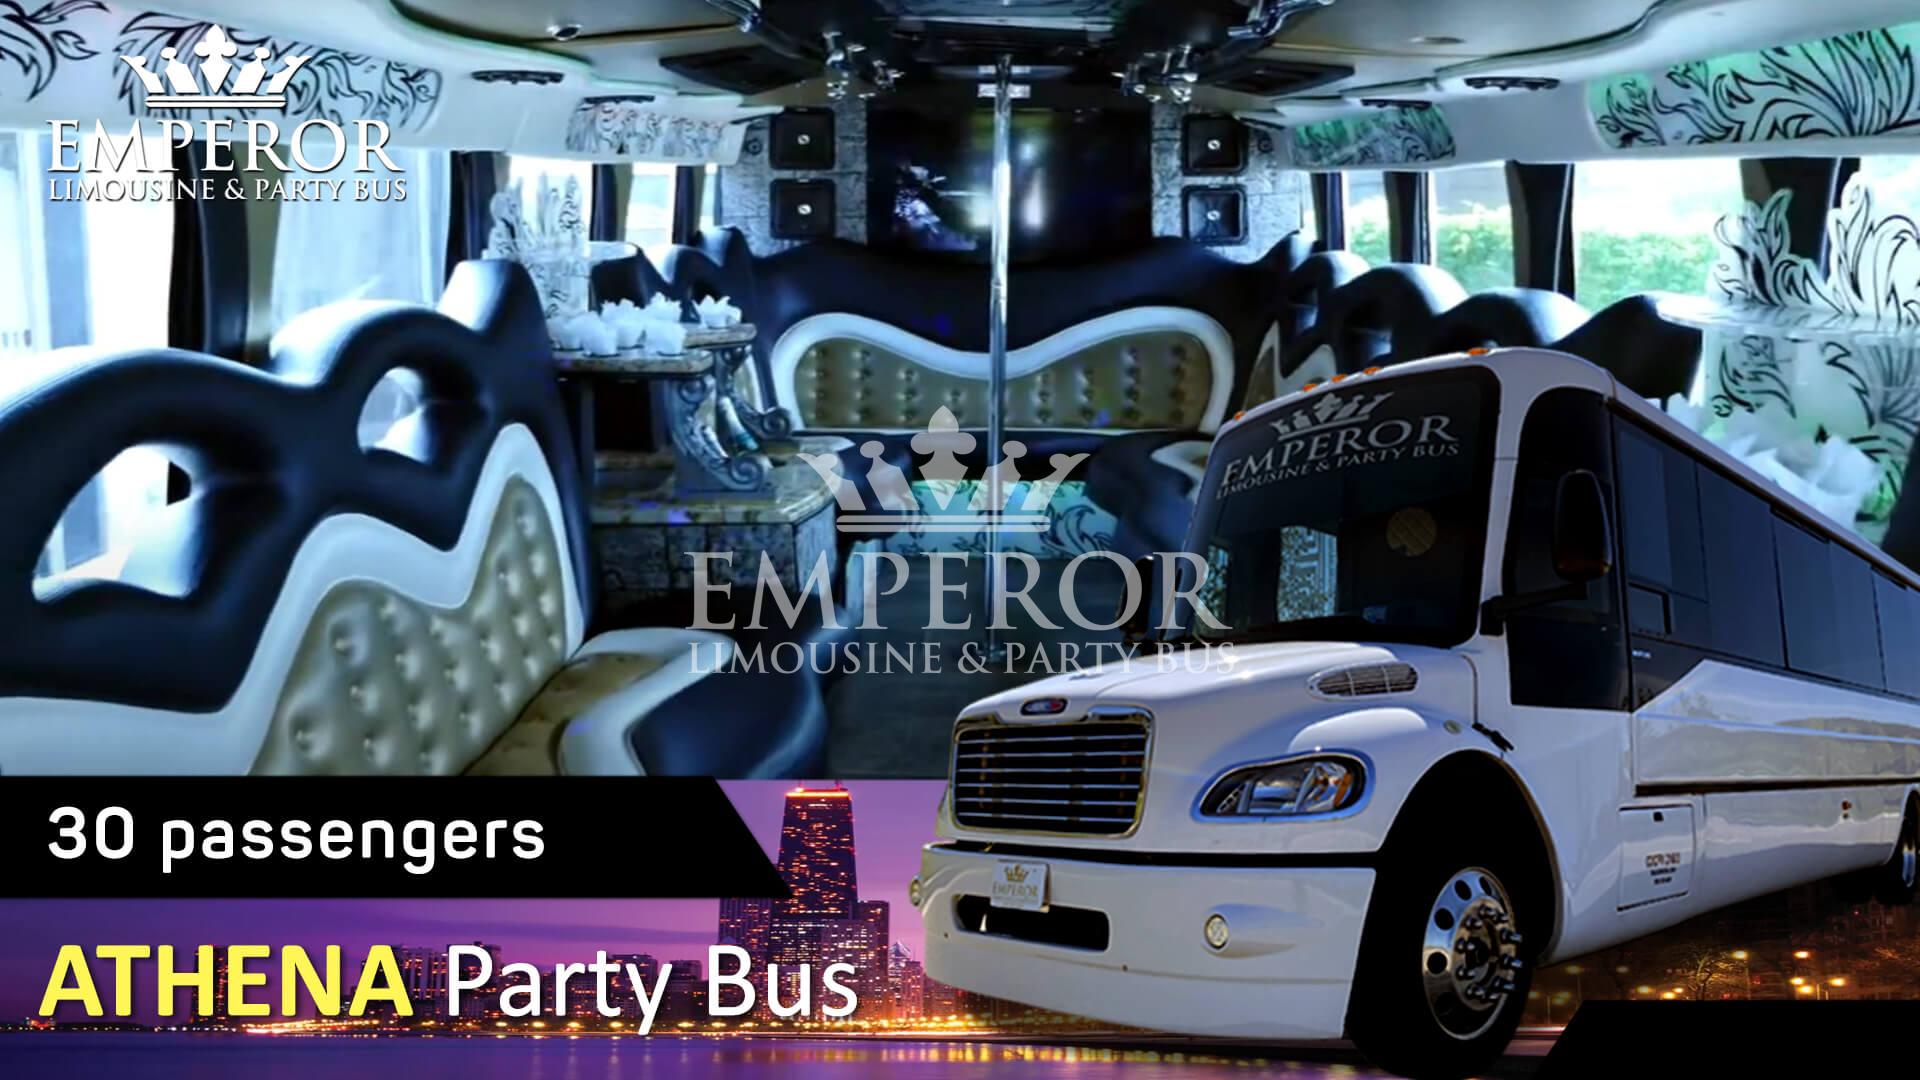 Bachelorette Party bus rental service in Chicago - Athena Edition